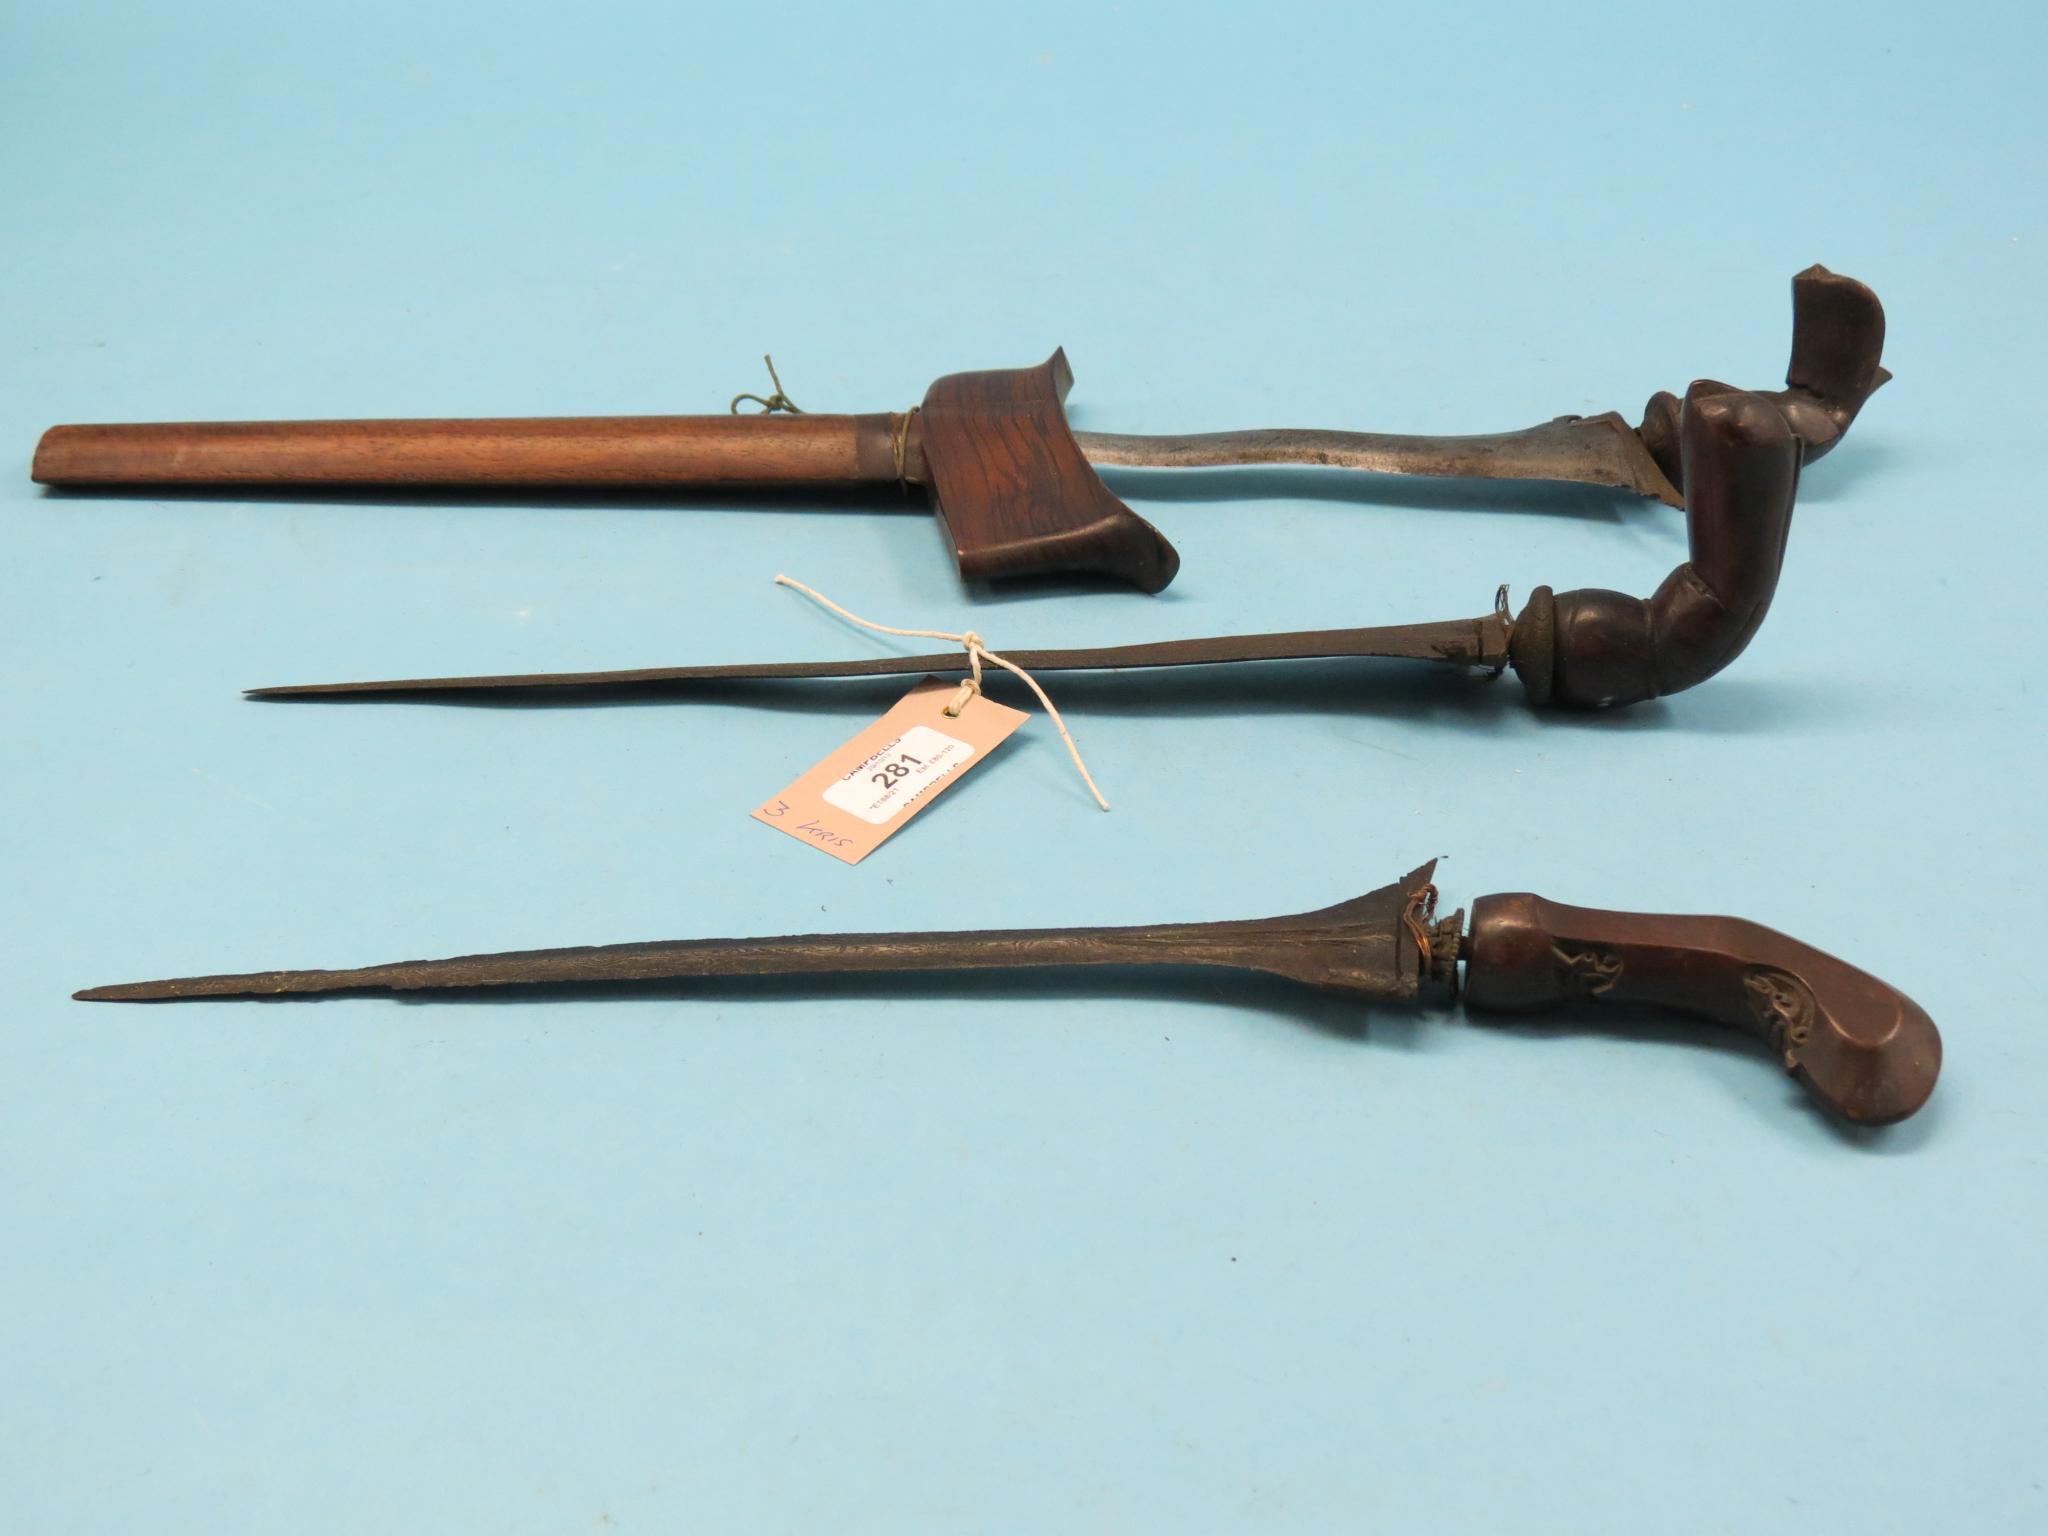 Three kris, each with curved, double-edged blade and carved wood handle, one within sheath